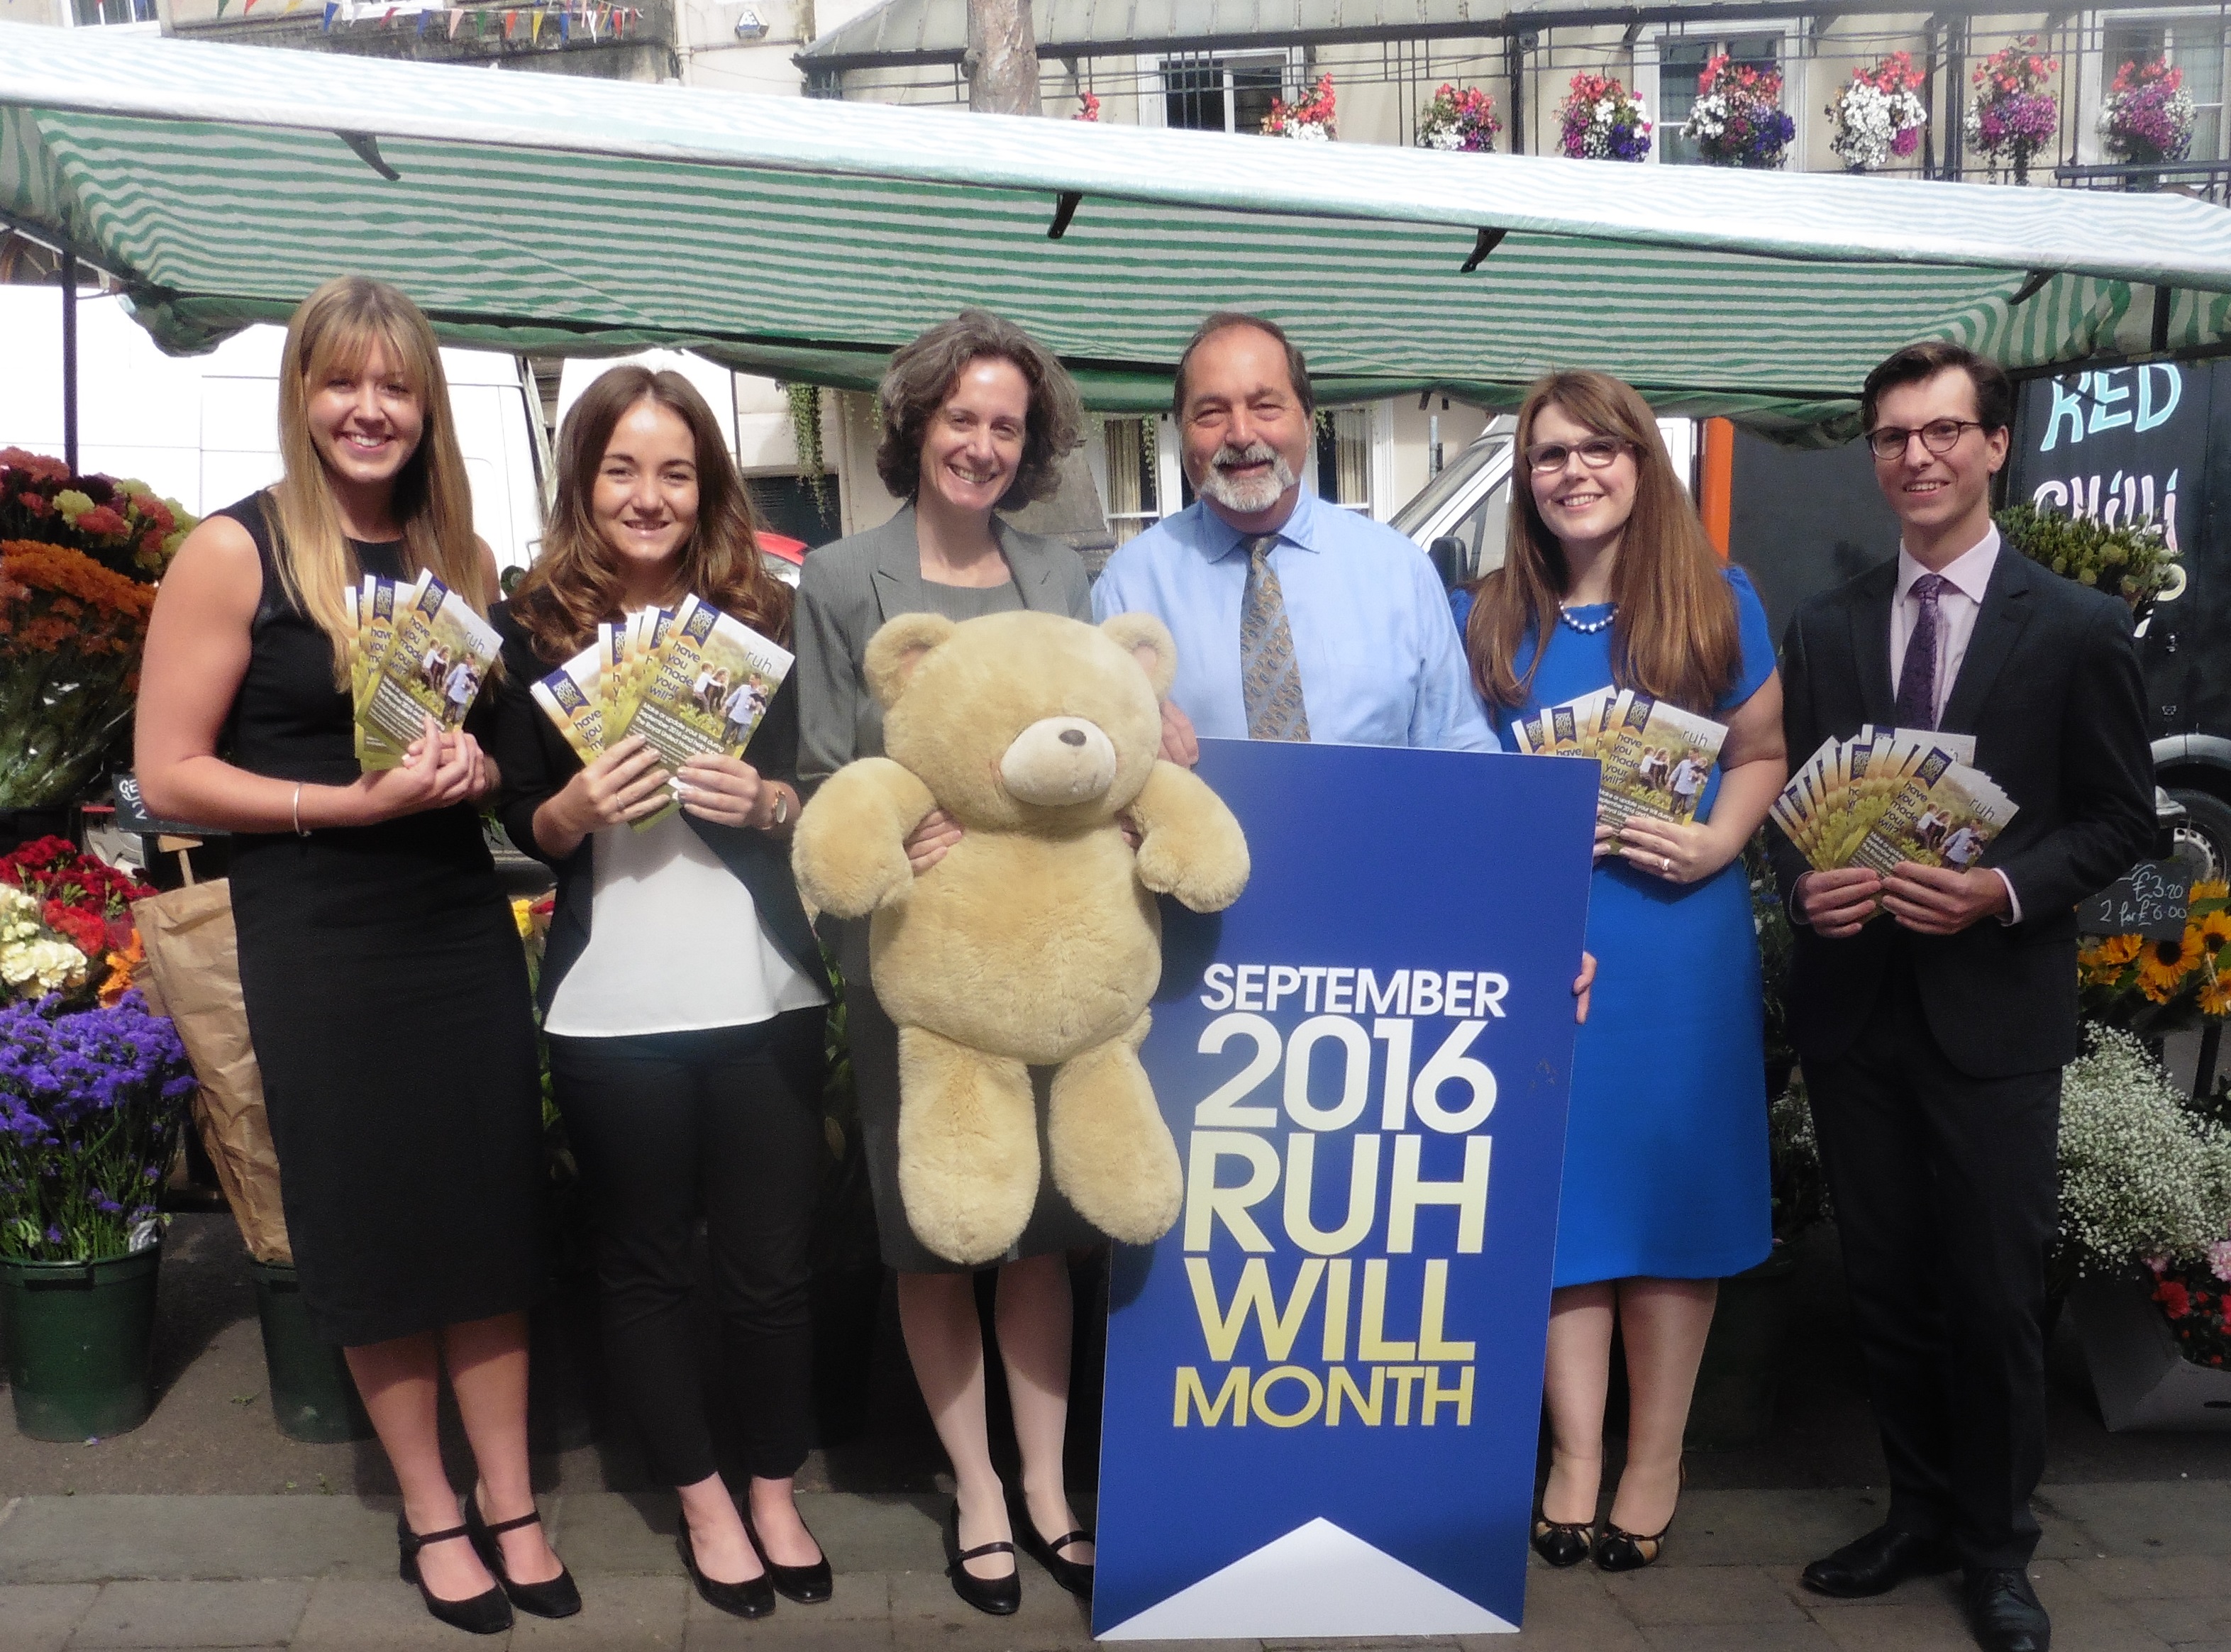 FDC Law raises over Five Thousand Pounds for the RUH